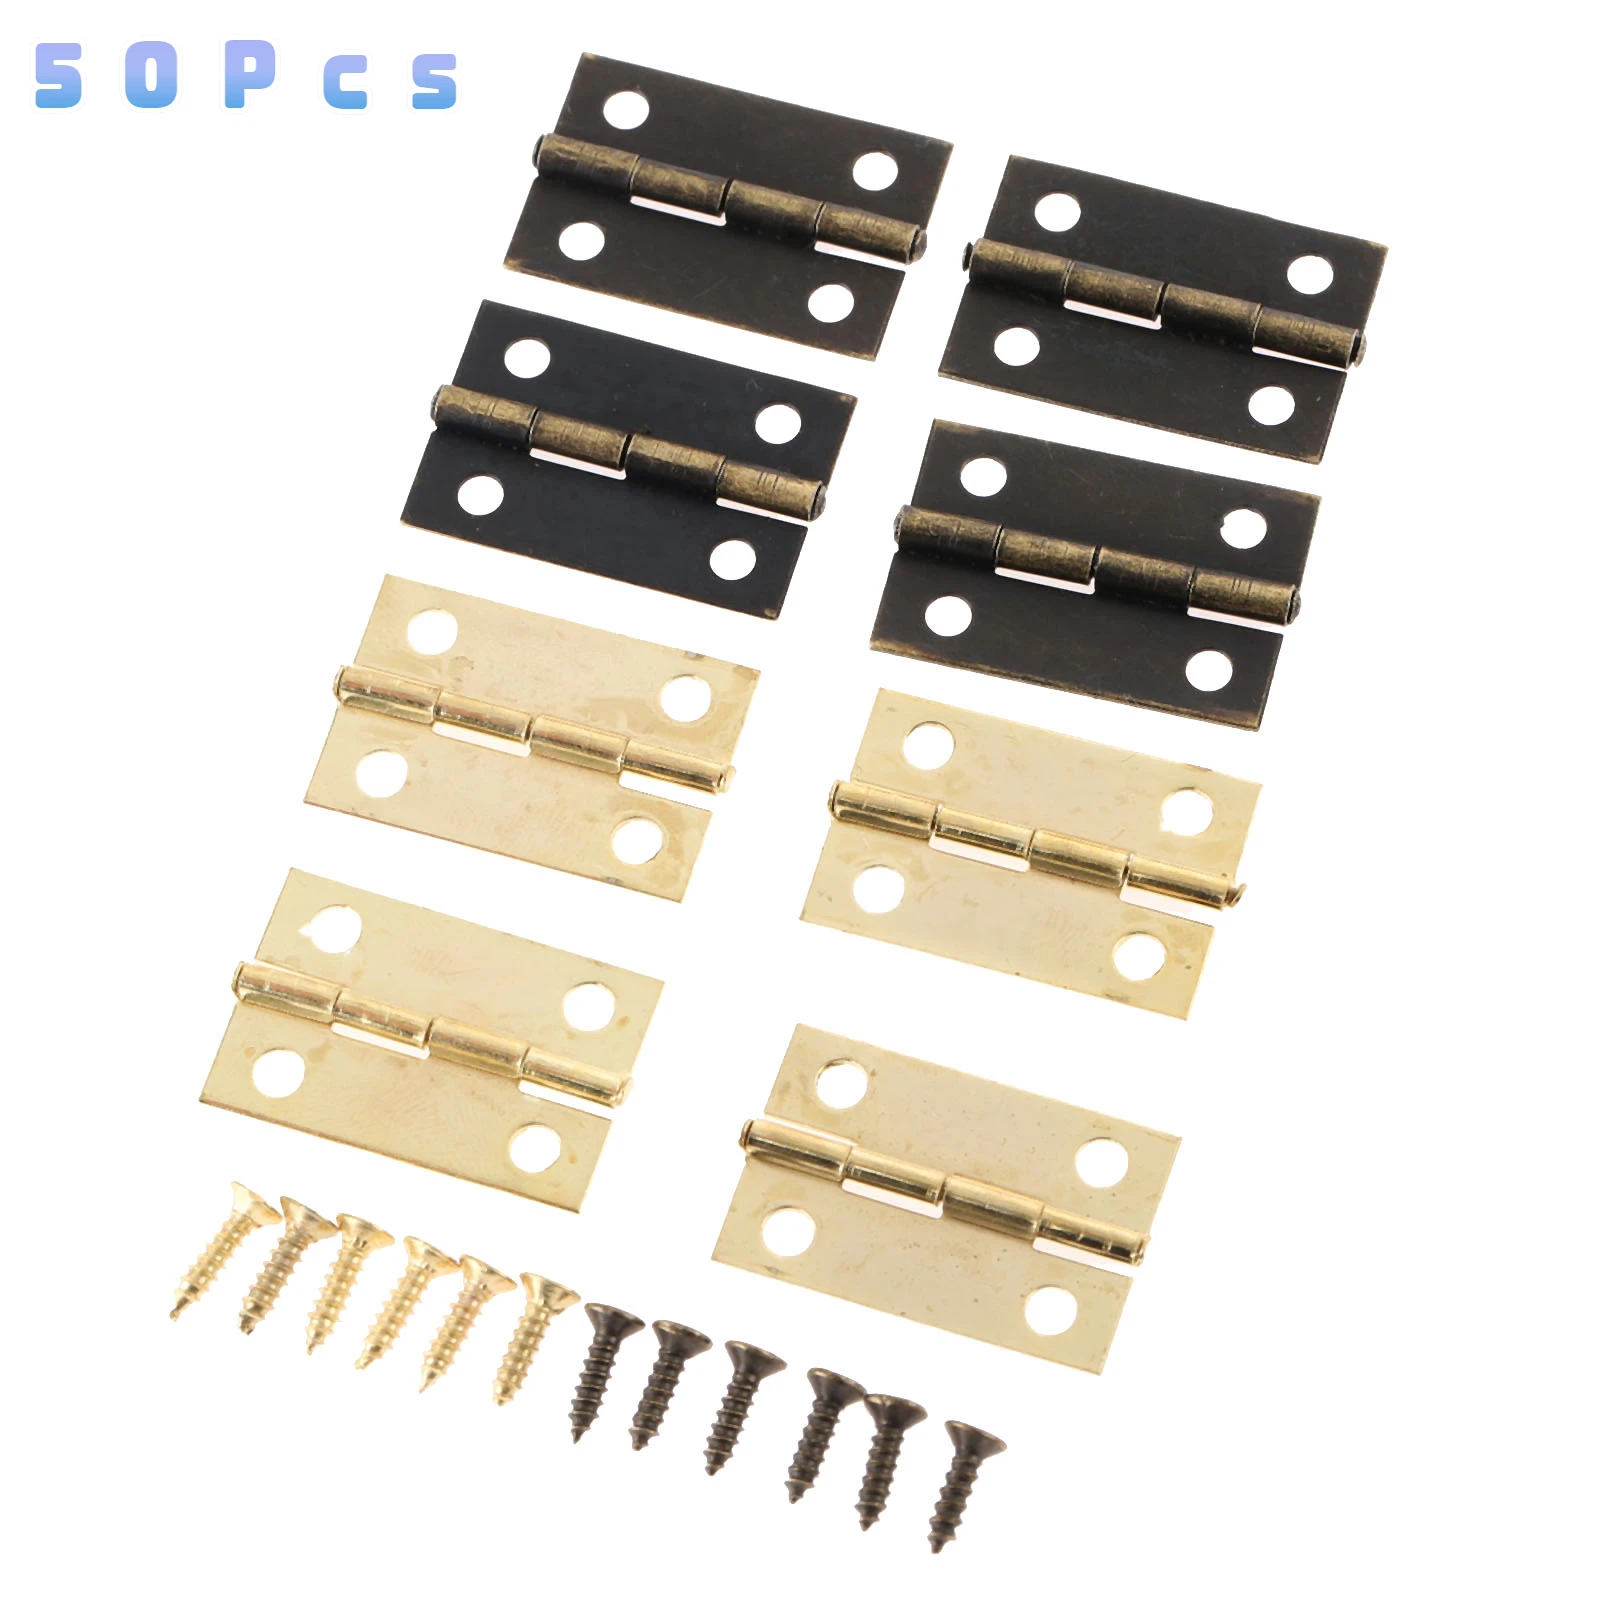 

DRELD 50Pcs Antique Bronze/Gold Decorative Hinges For Jewelry Box Furniture Fittings Cabinet Drawer Door Butt Hinge with Screws